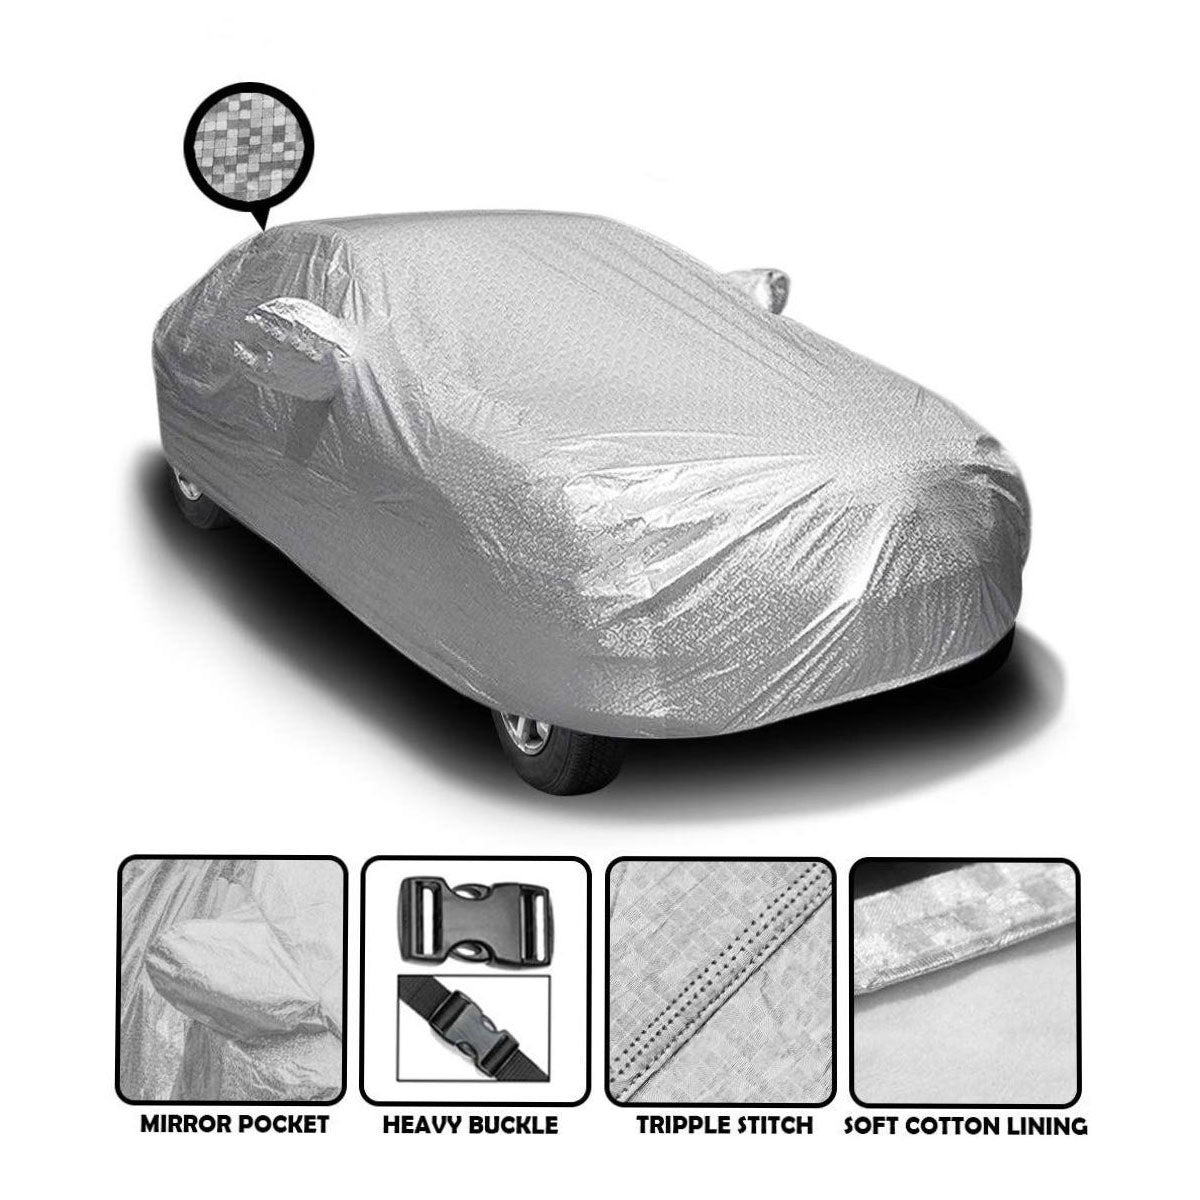 Oshotto Spyro Silver Anti Reflective, dustproof and Water Proof Car Body Cover with Mirror Pockets For Toyota Yaris